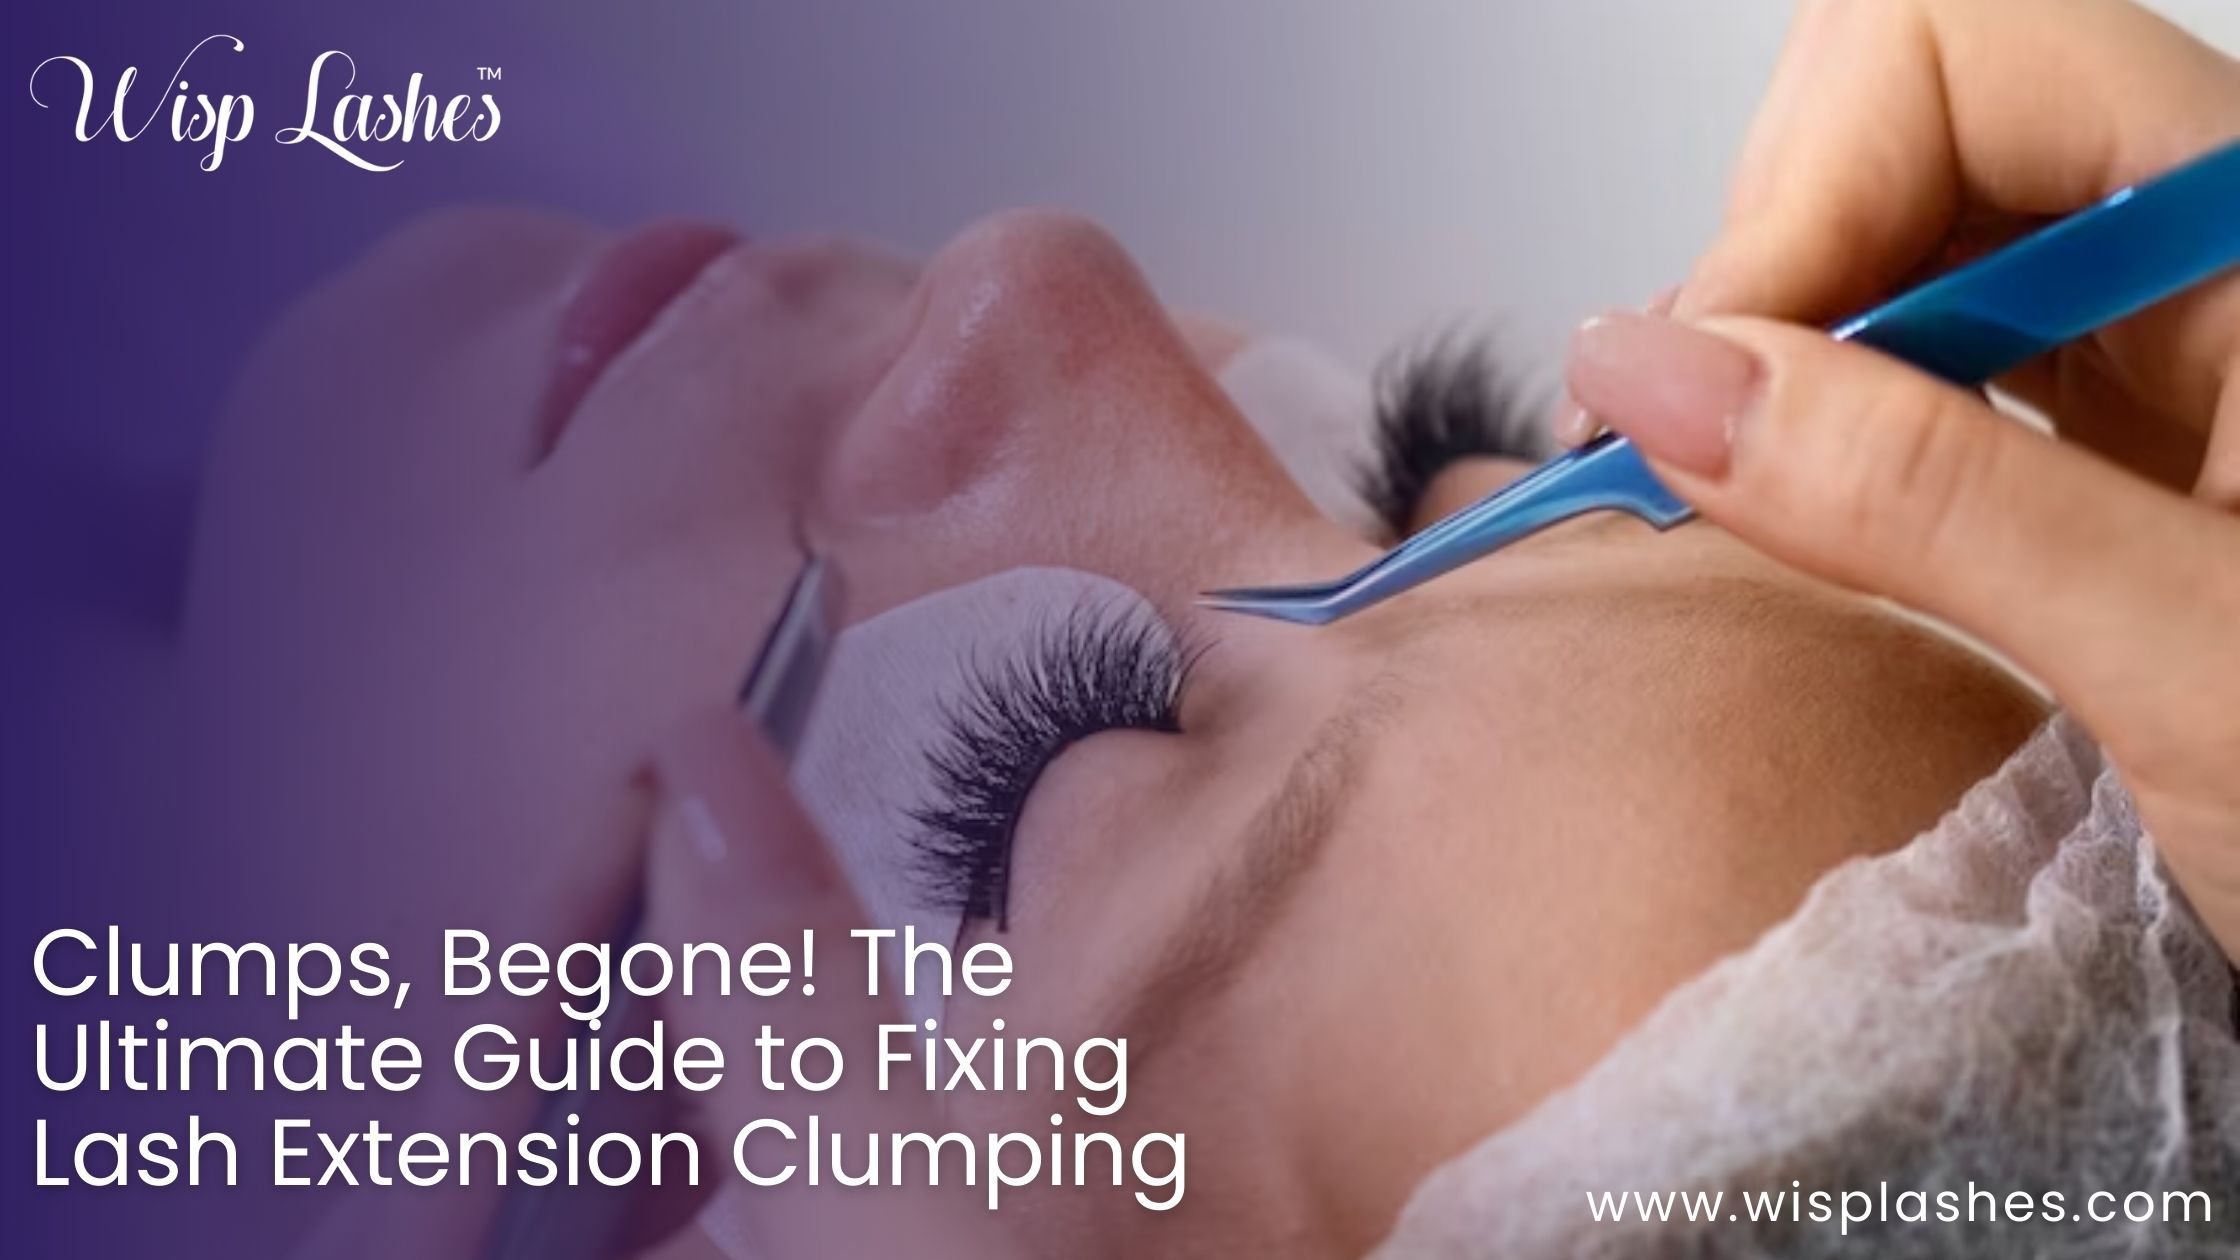 Clumps, Begone! The Ultimate Guide to Fixing Lash Extension Clumping – Wisp Lashes